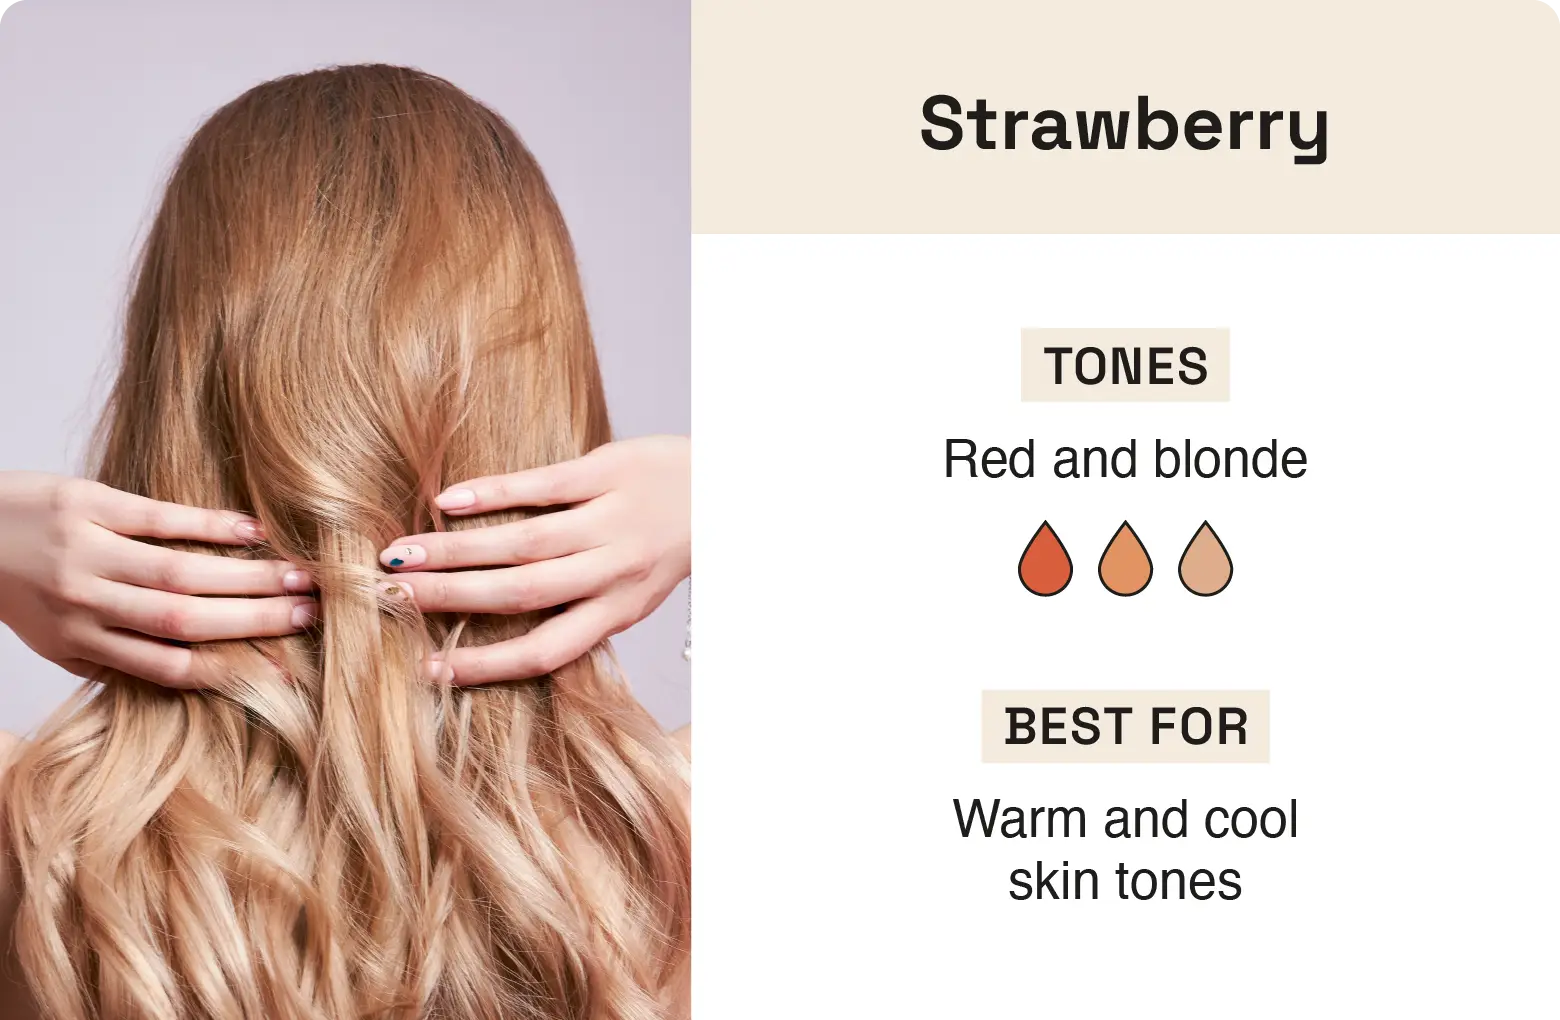 Graphic explaining strawberry blonde hair and what skin tones it’s best for.